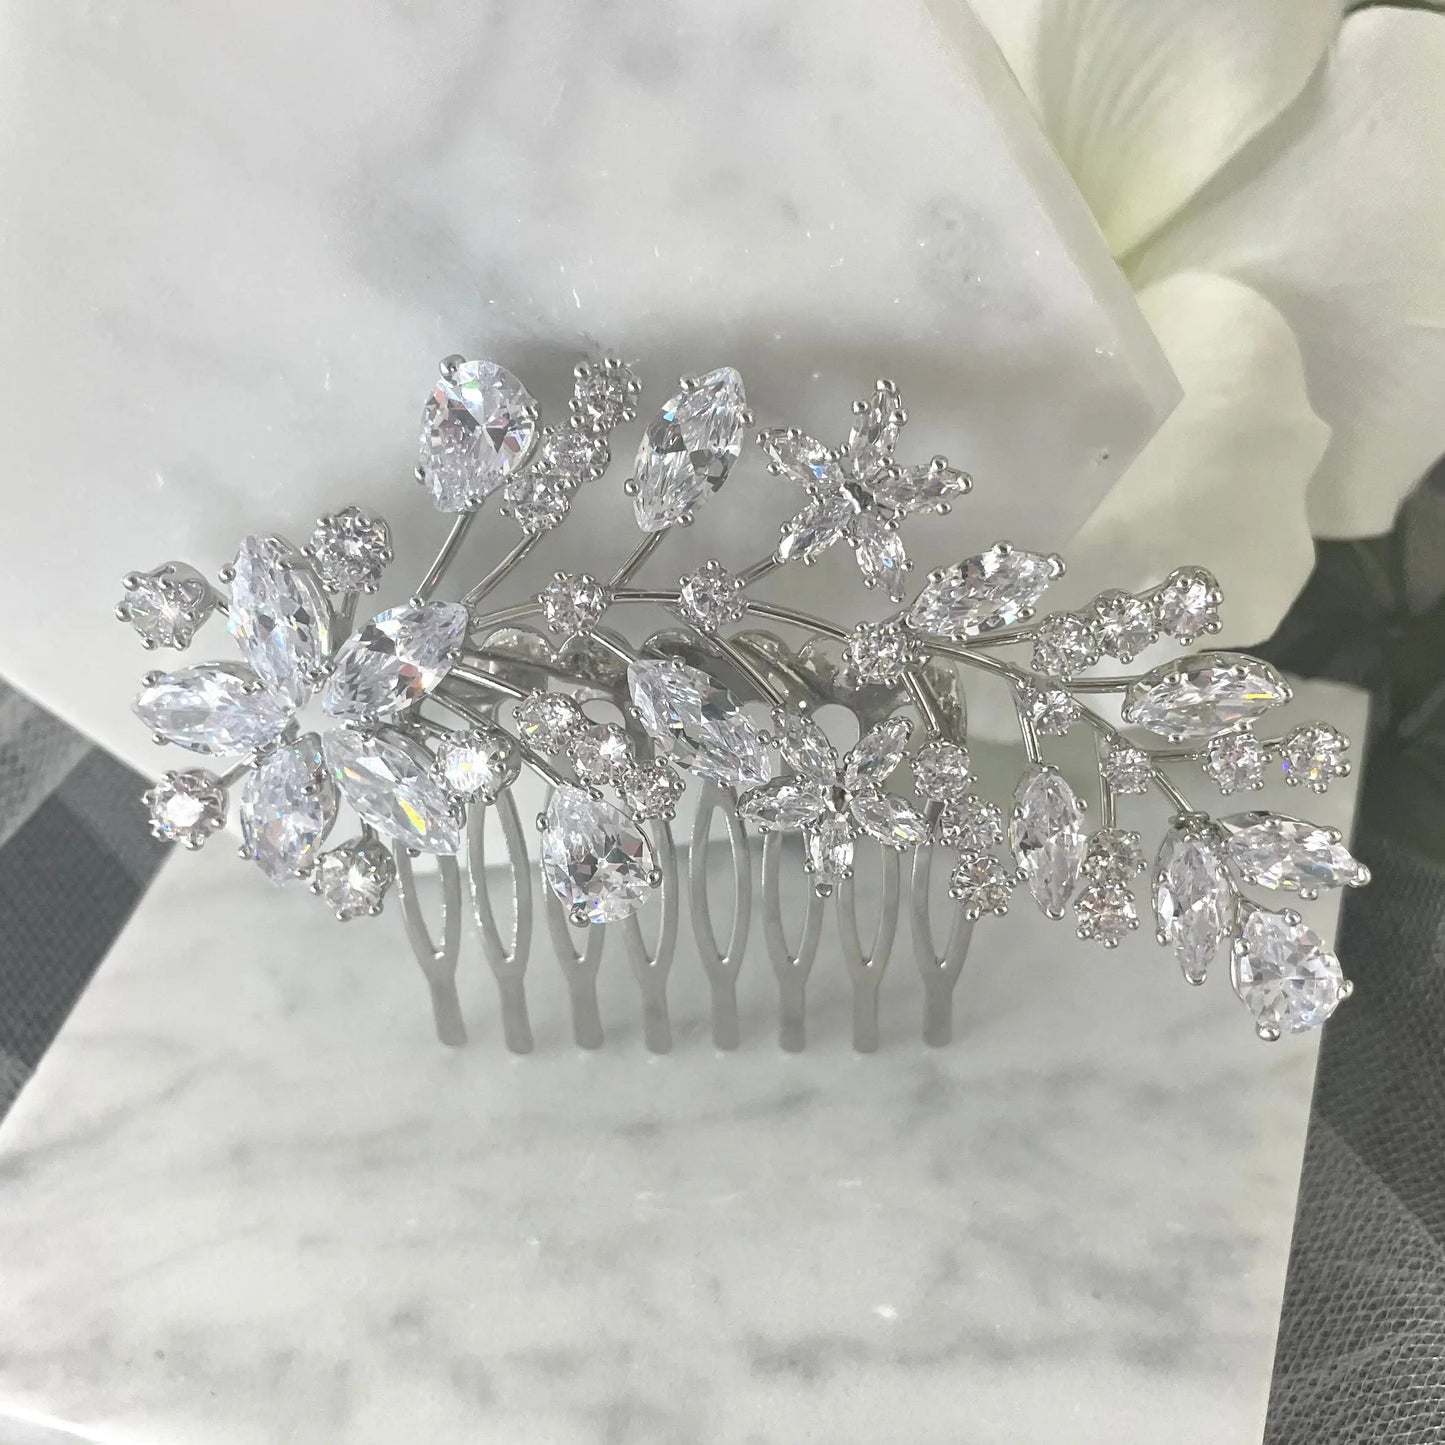 Exquisite Sally Bridal Wedding Hair Comb in silver, featuring detailed leaves, flowers, and crystal clusters, ideal for adding a sophisticated sparkle to bridal hairstyles.